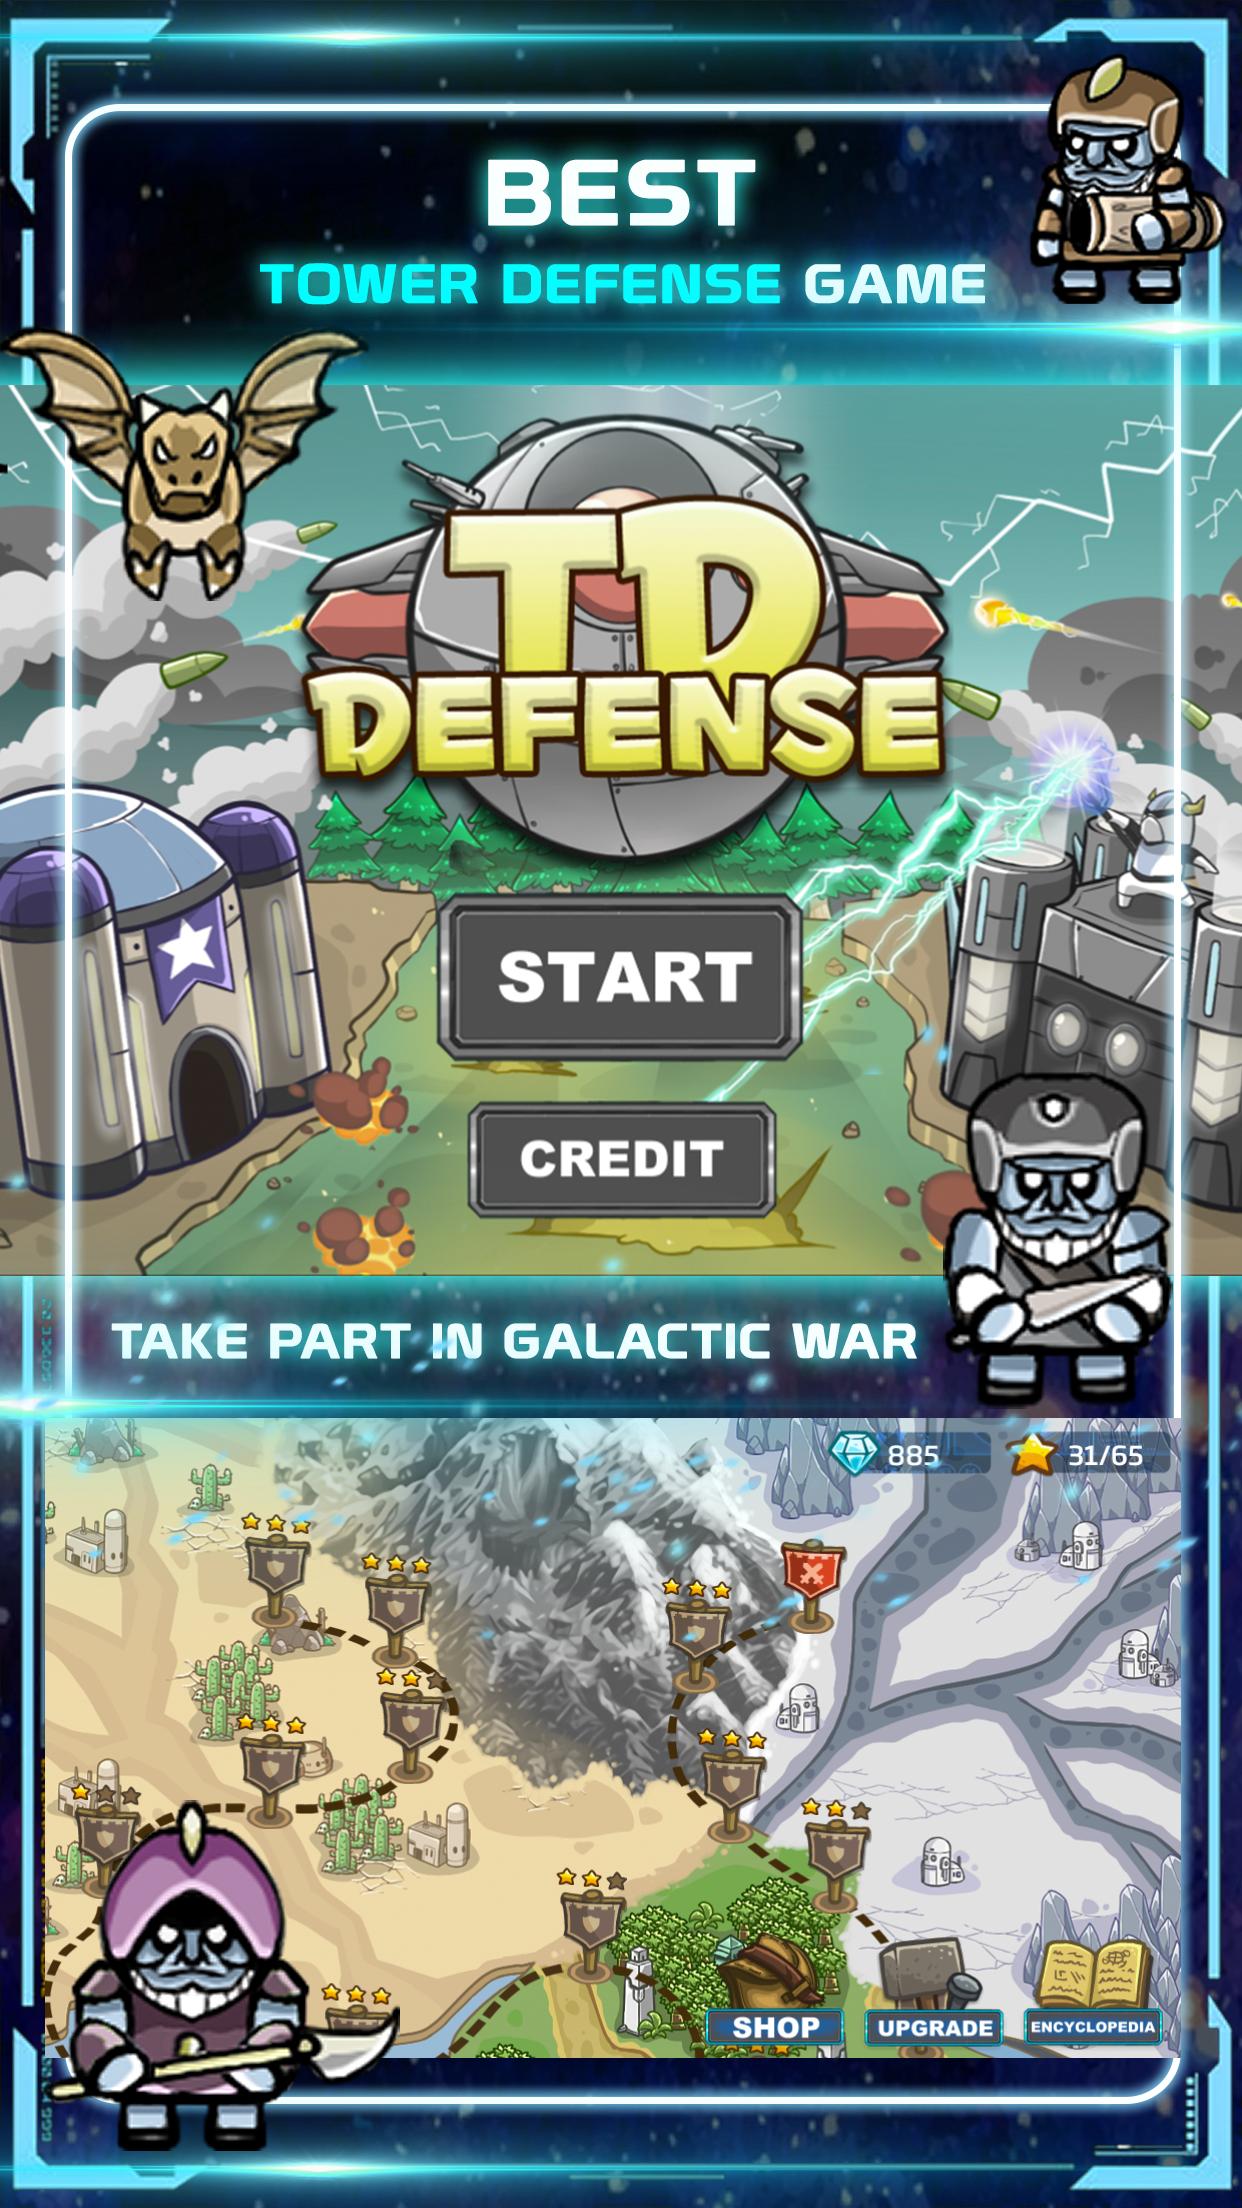 Star Td Galaxy Defense Game For Android Apk Download - tower battles battlefront fan made roblox